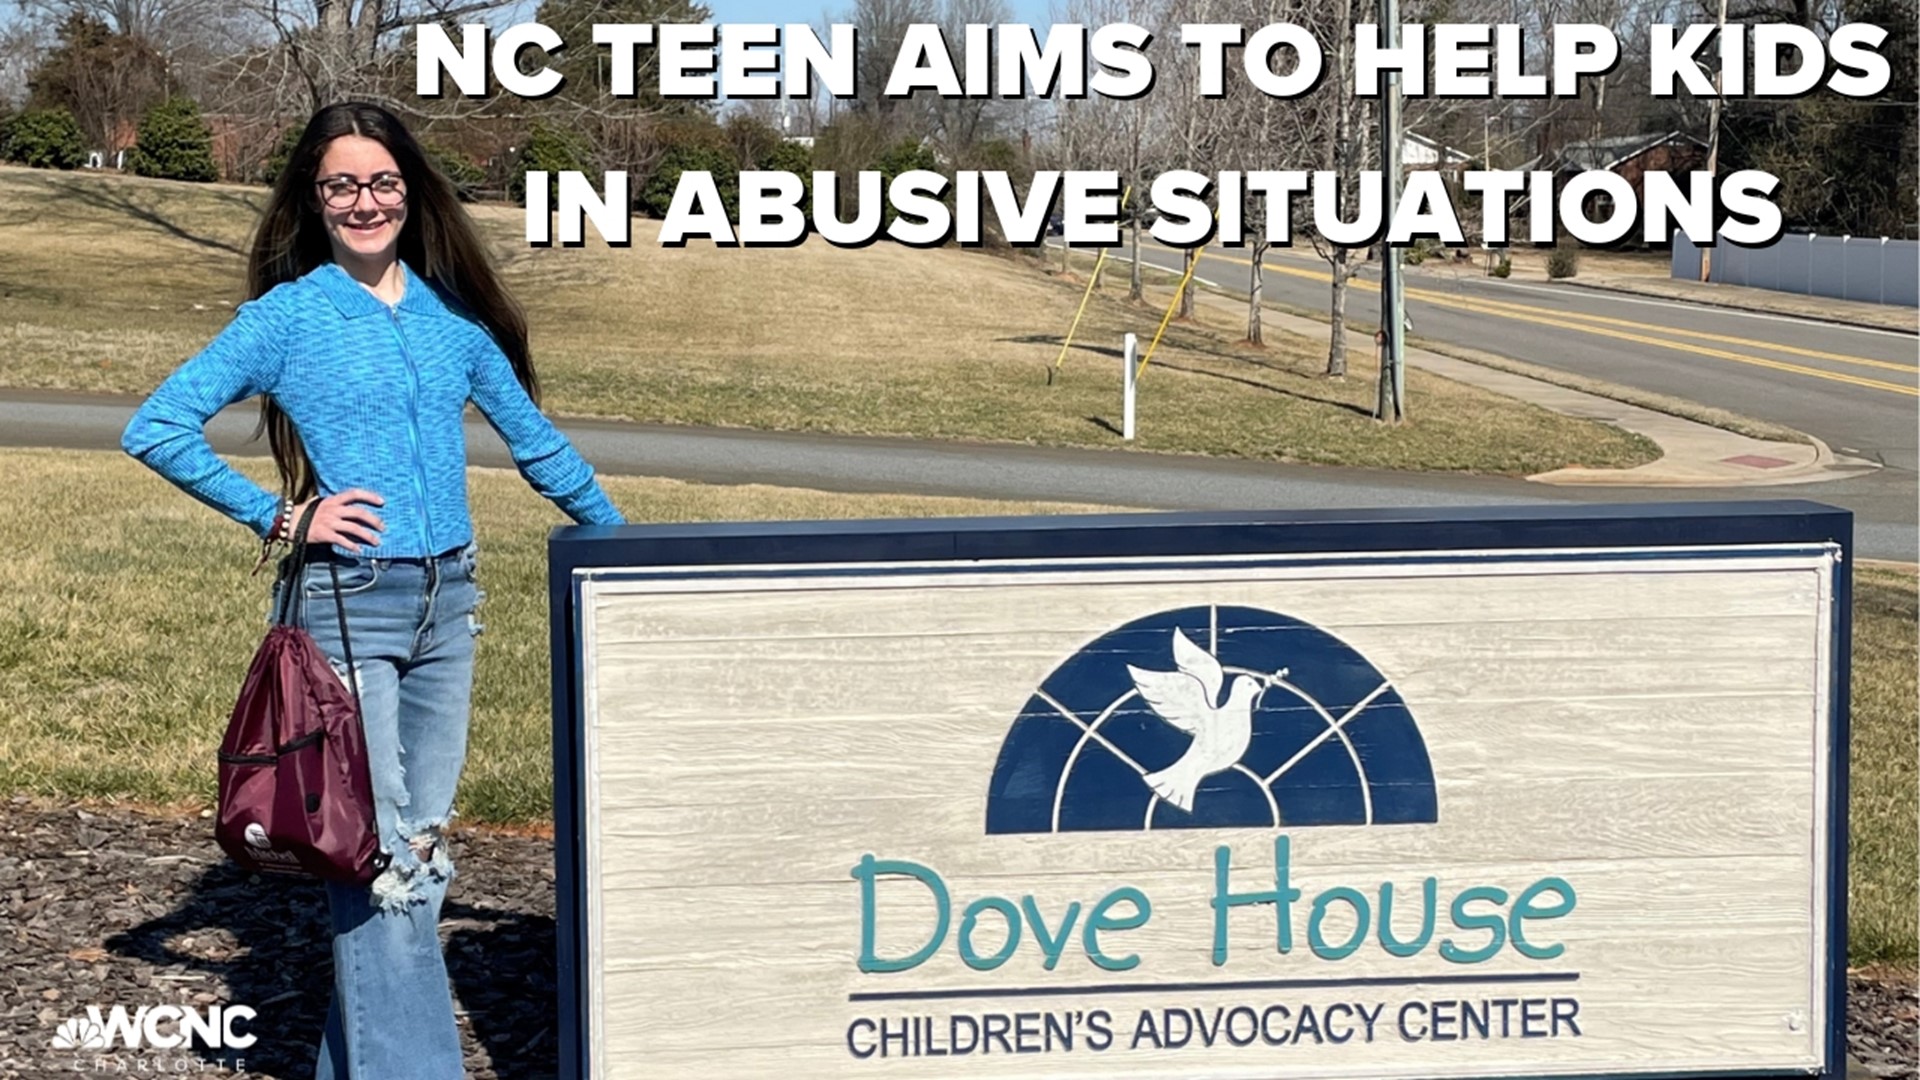 NC teen aims to help kids in abusive situations